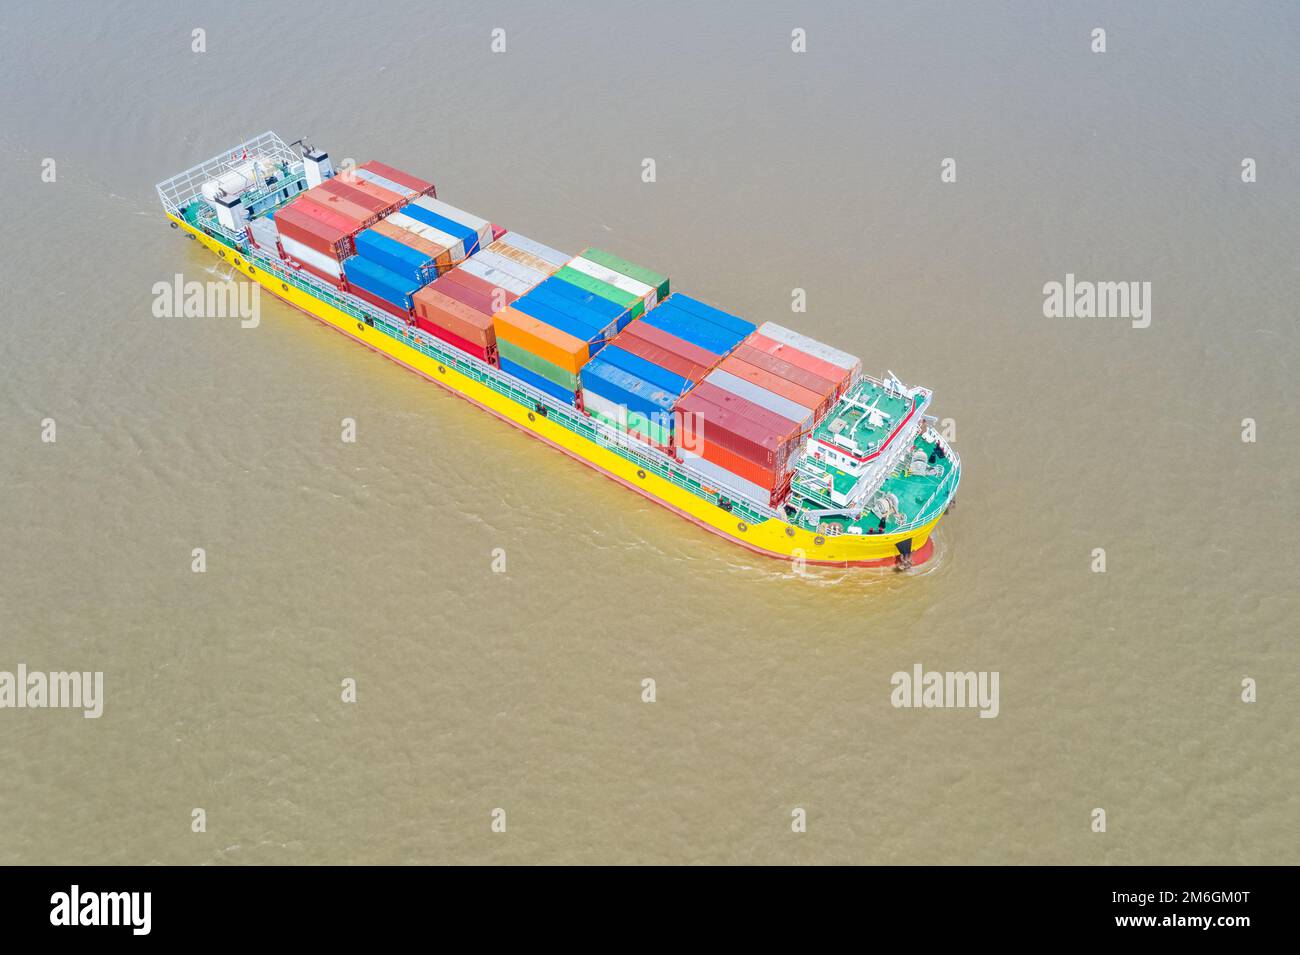 Aerial view of a container ship on river Stock Photo